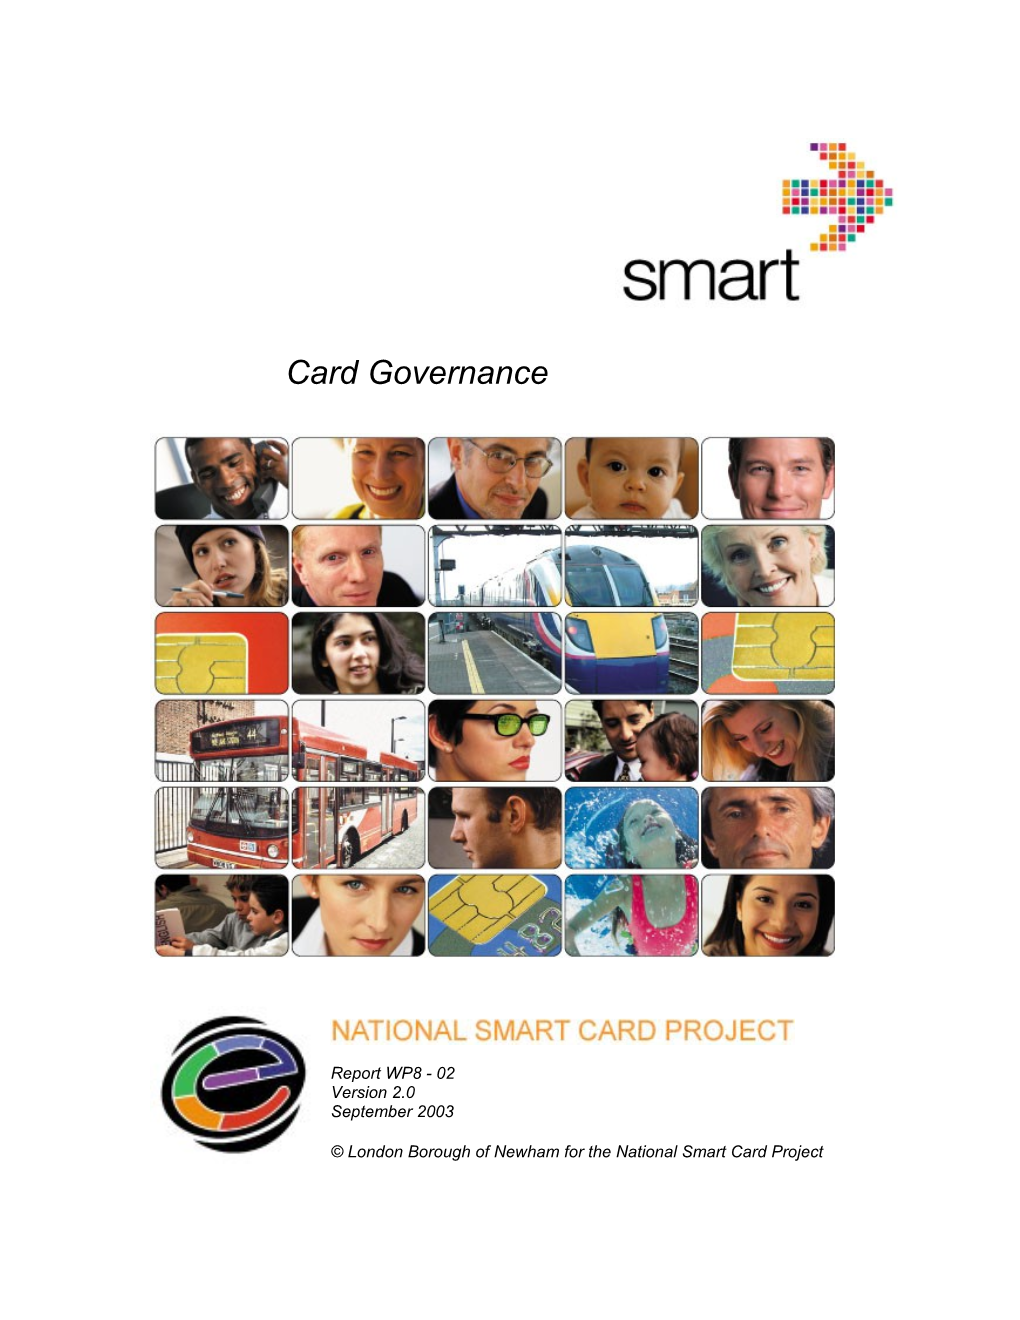 London Borough of Newham for the National Smart Card Project